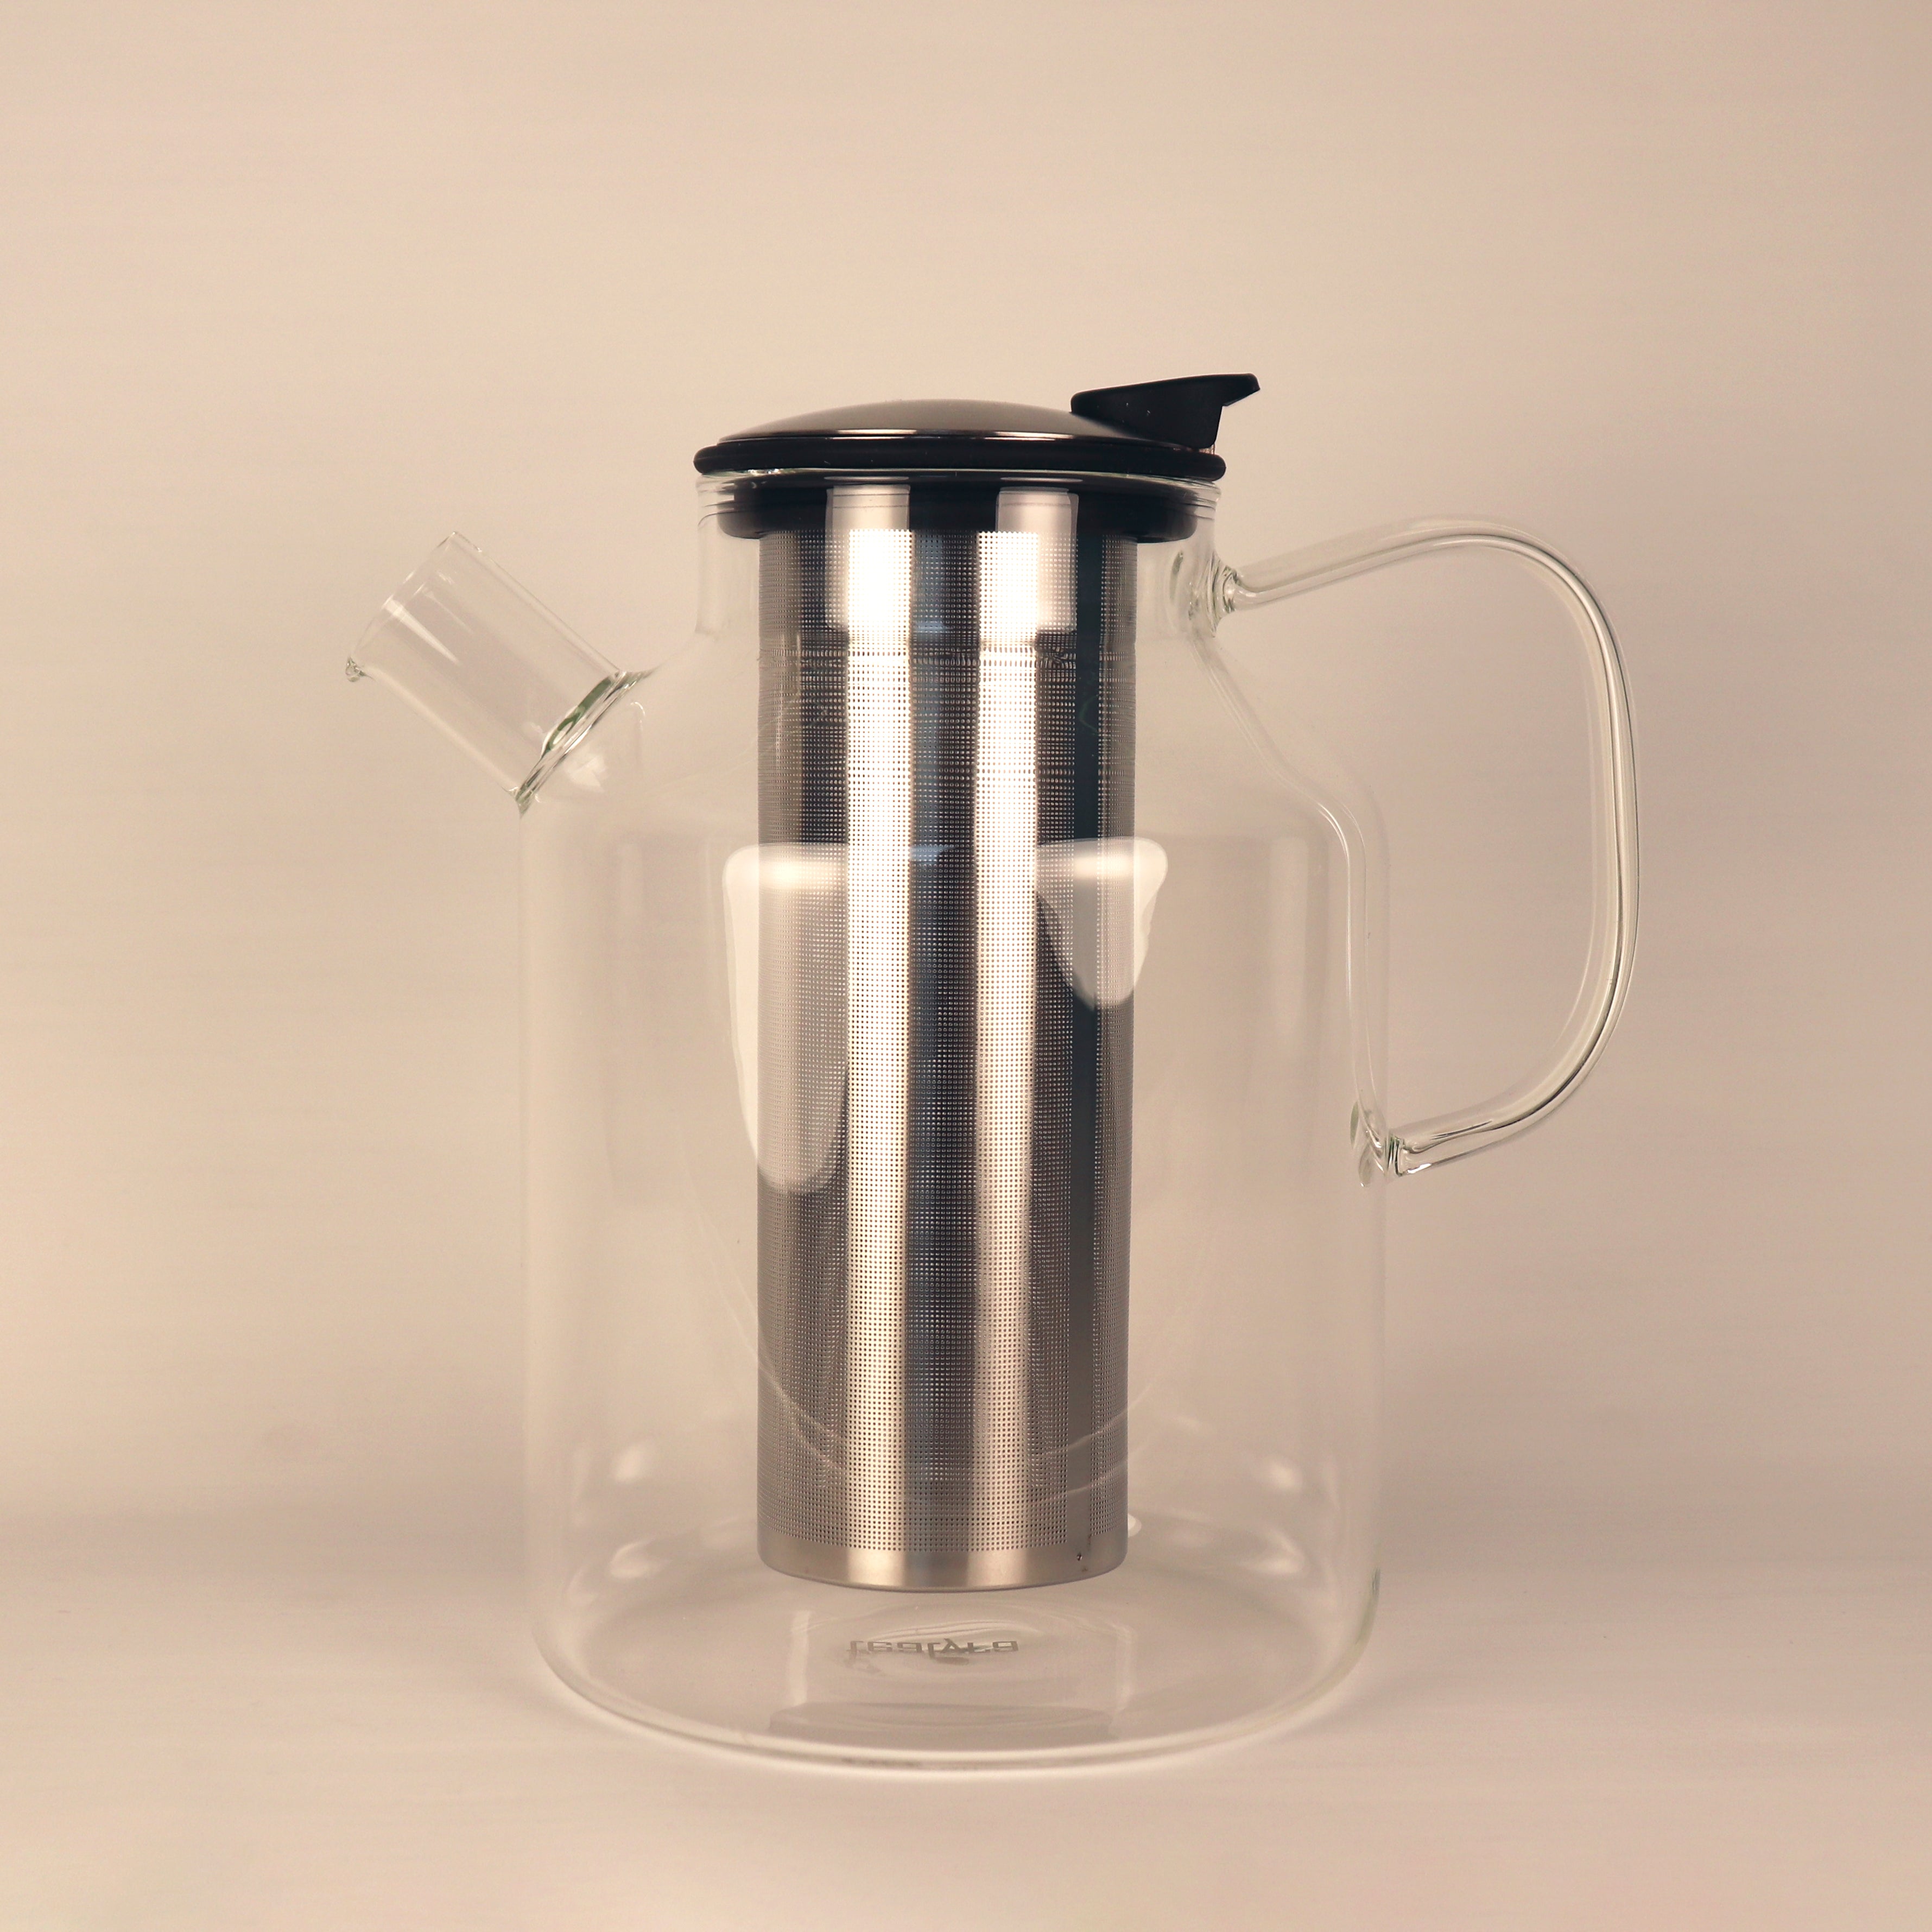 2.2L glass pitcher with infuser